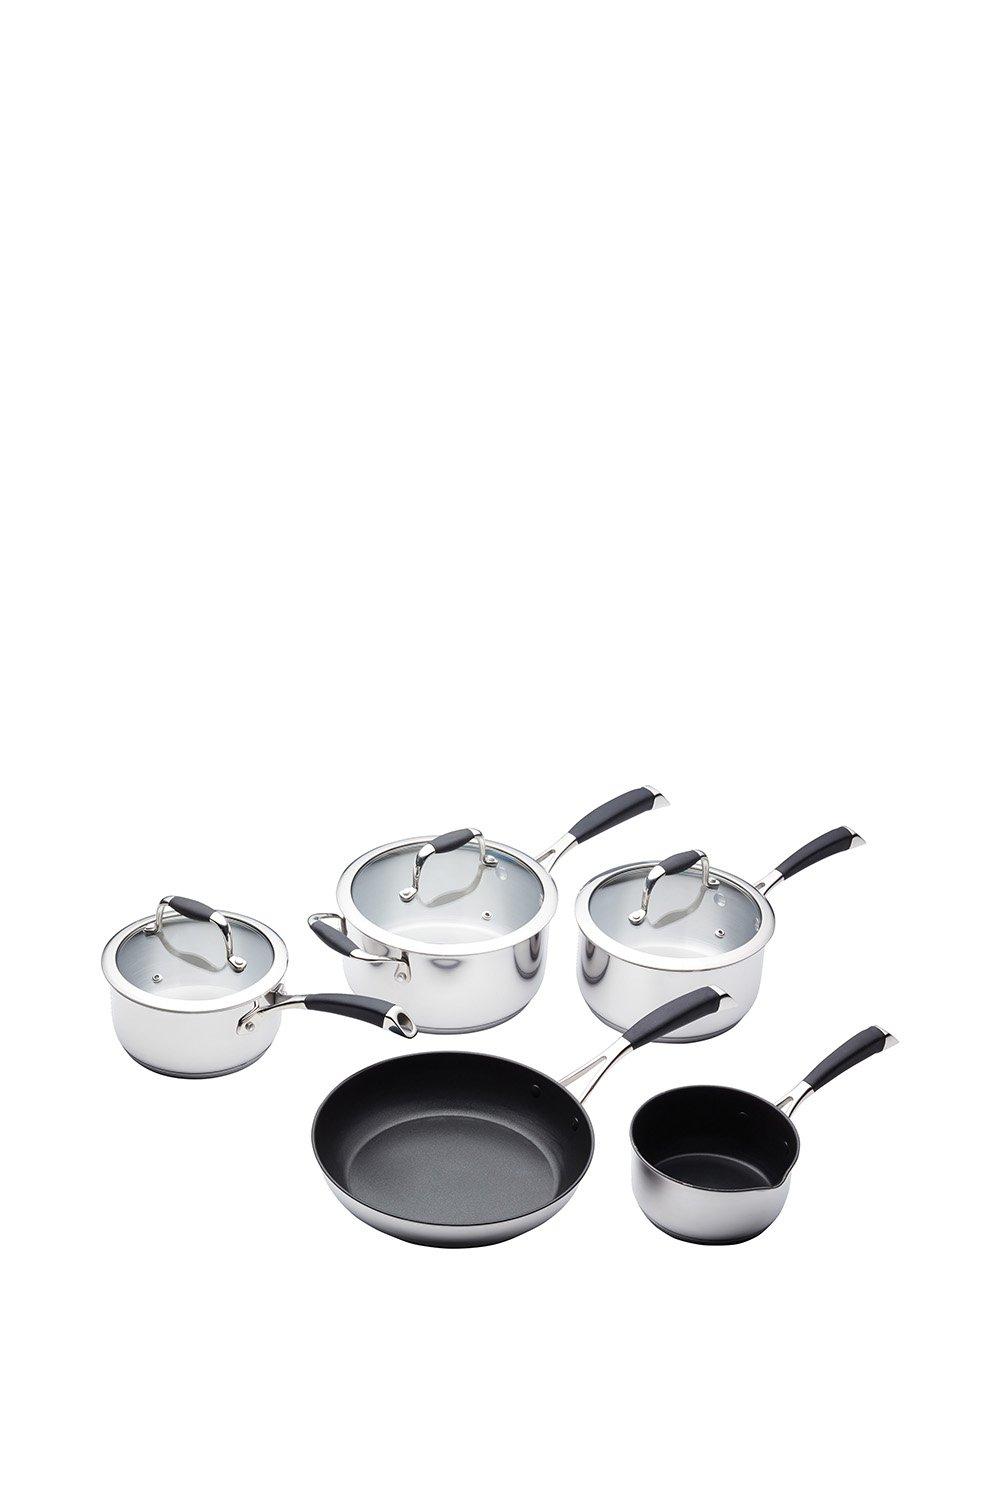 5 Piece Deluxe Stainless Steel Cookware Set